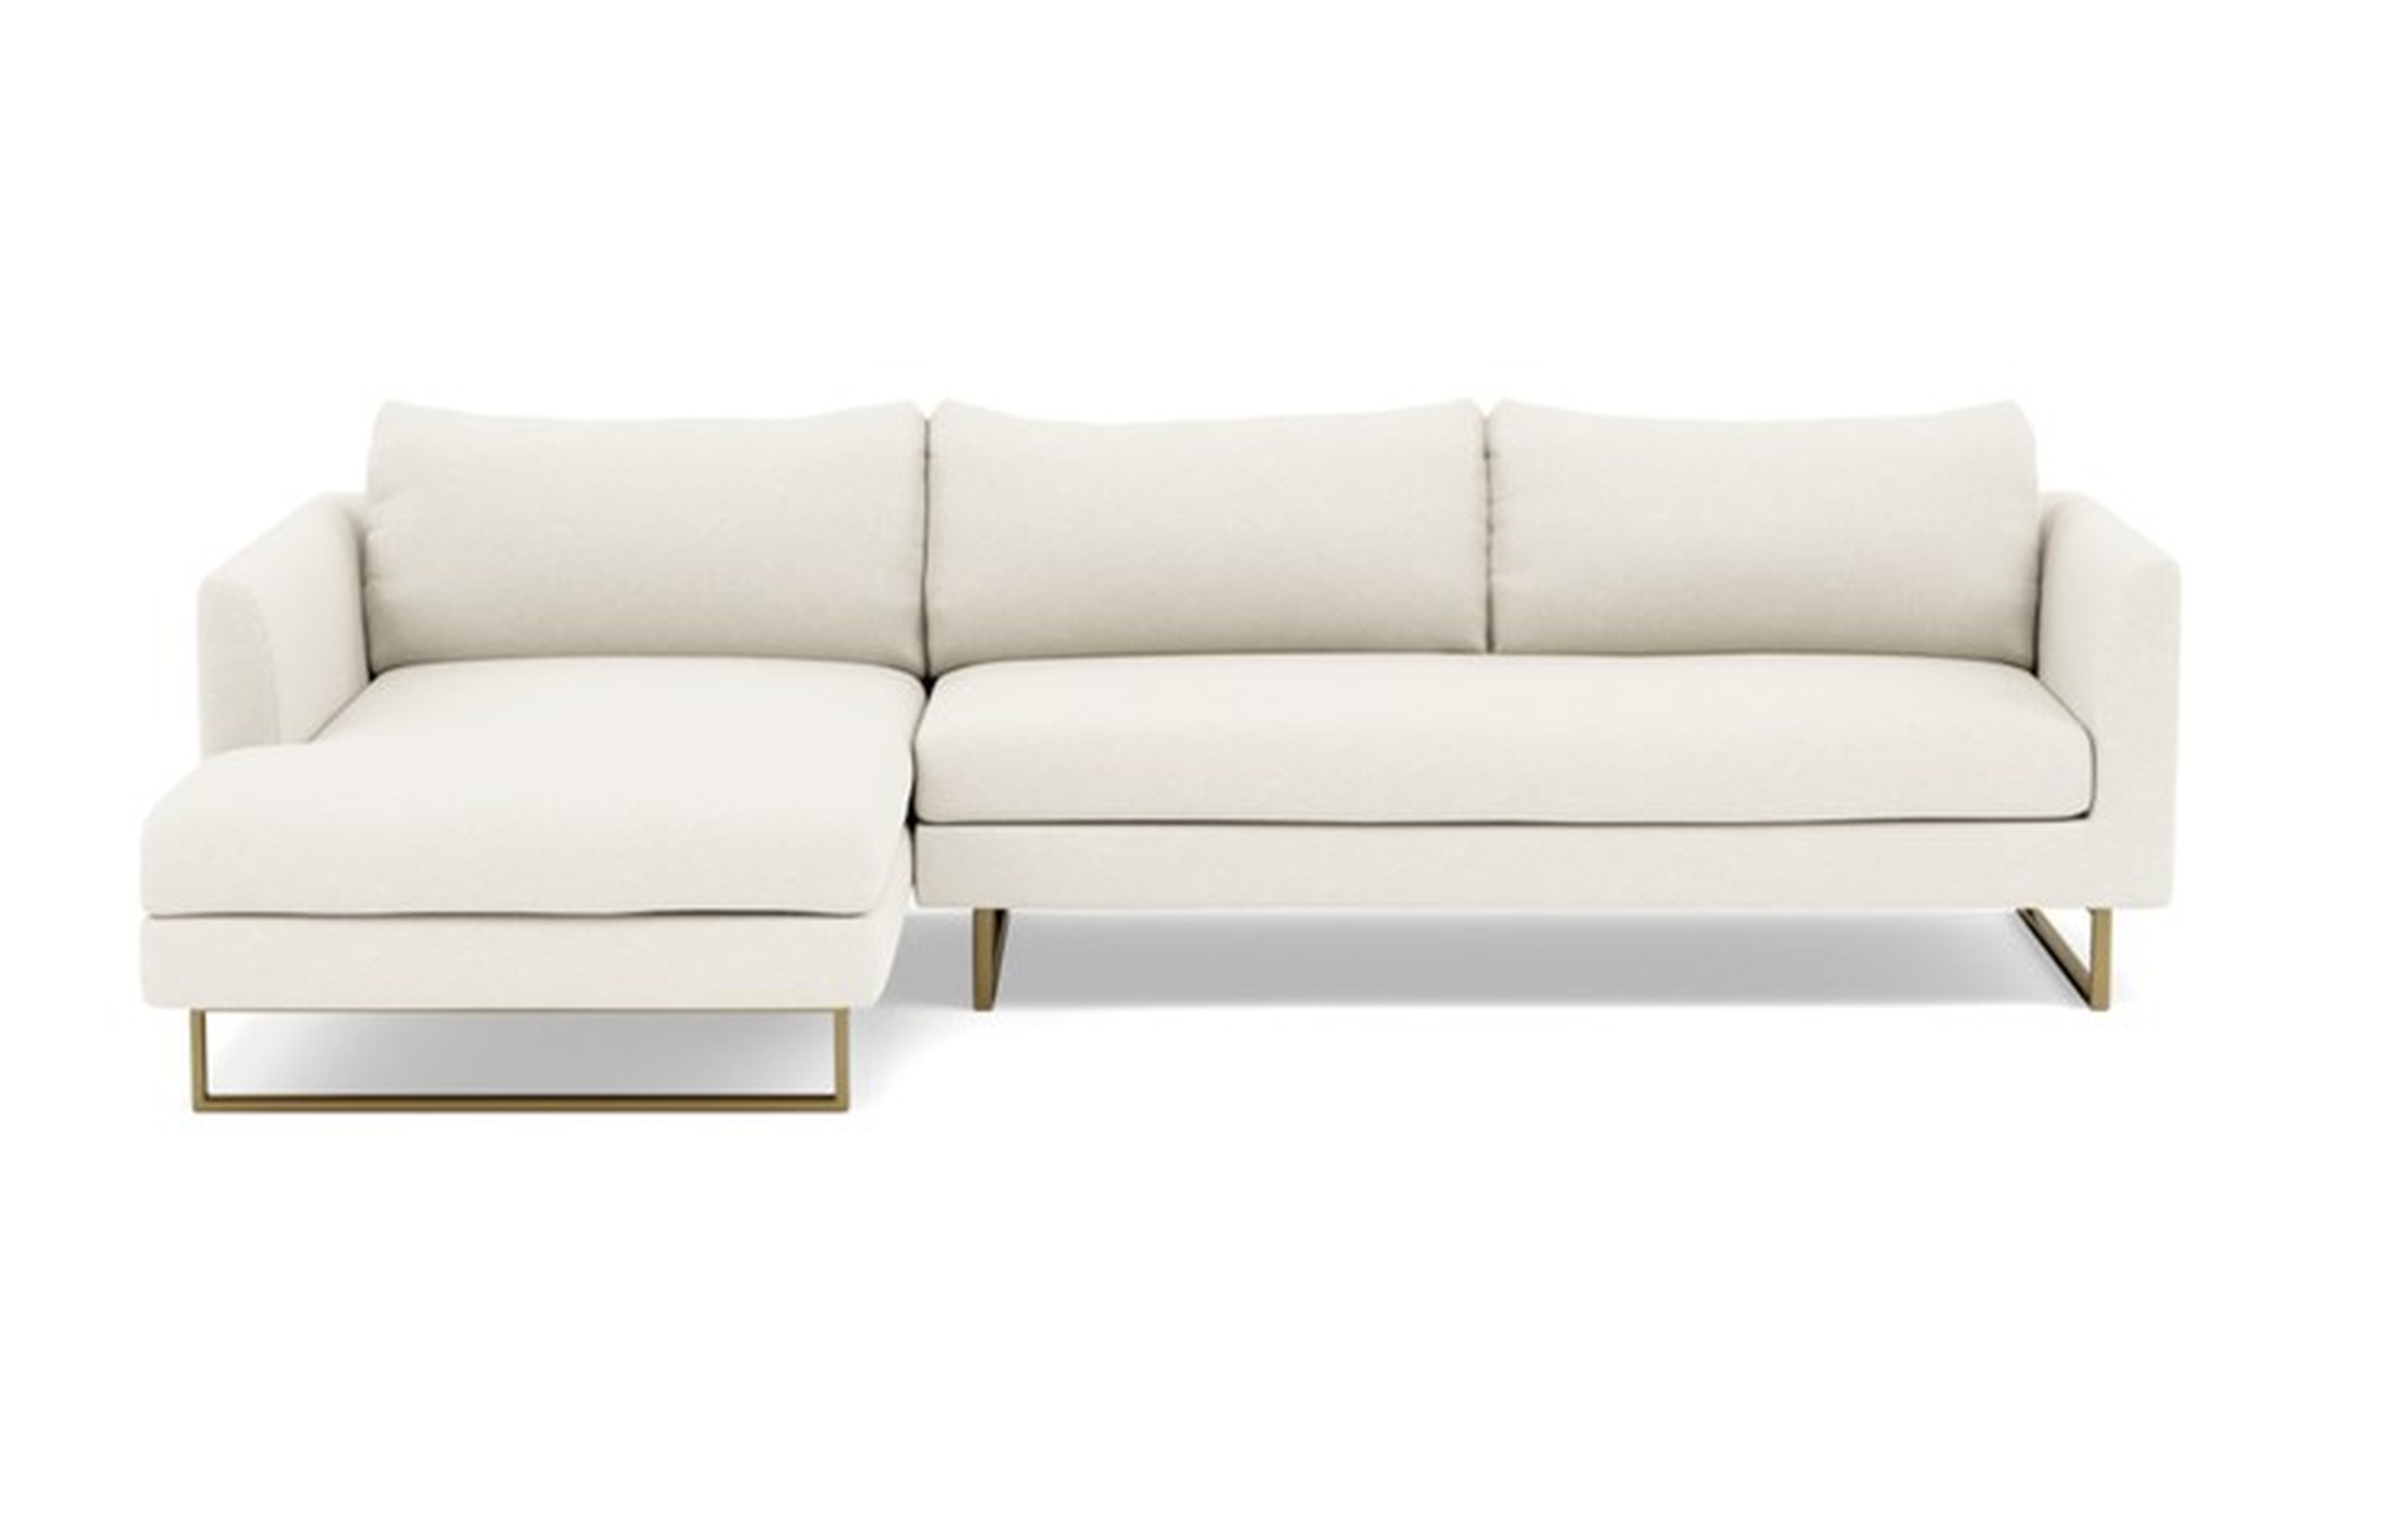 Owens Left Sectional with White Cirrus Fabric, down alt. cushions, and Matte Brass legs - Interior Define